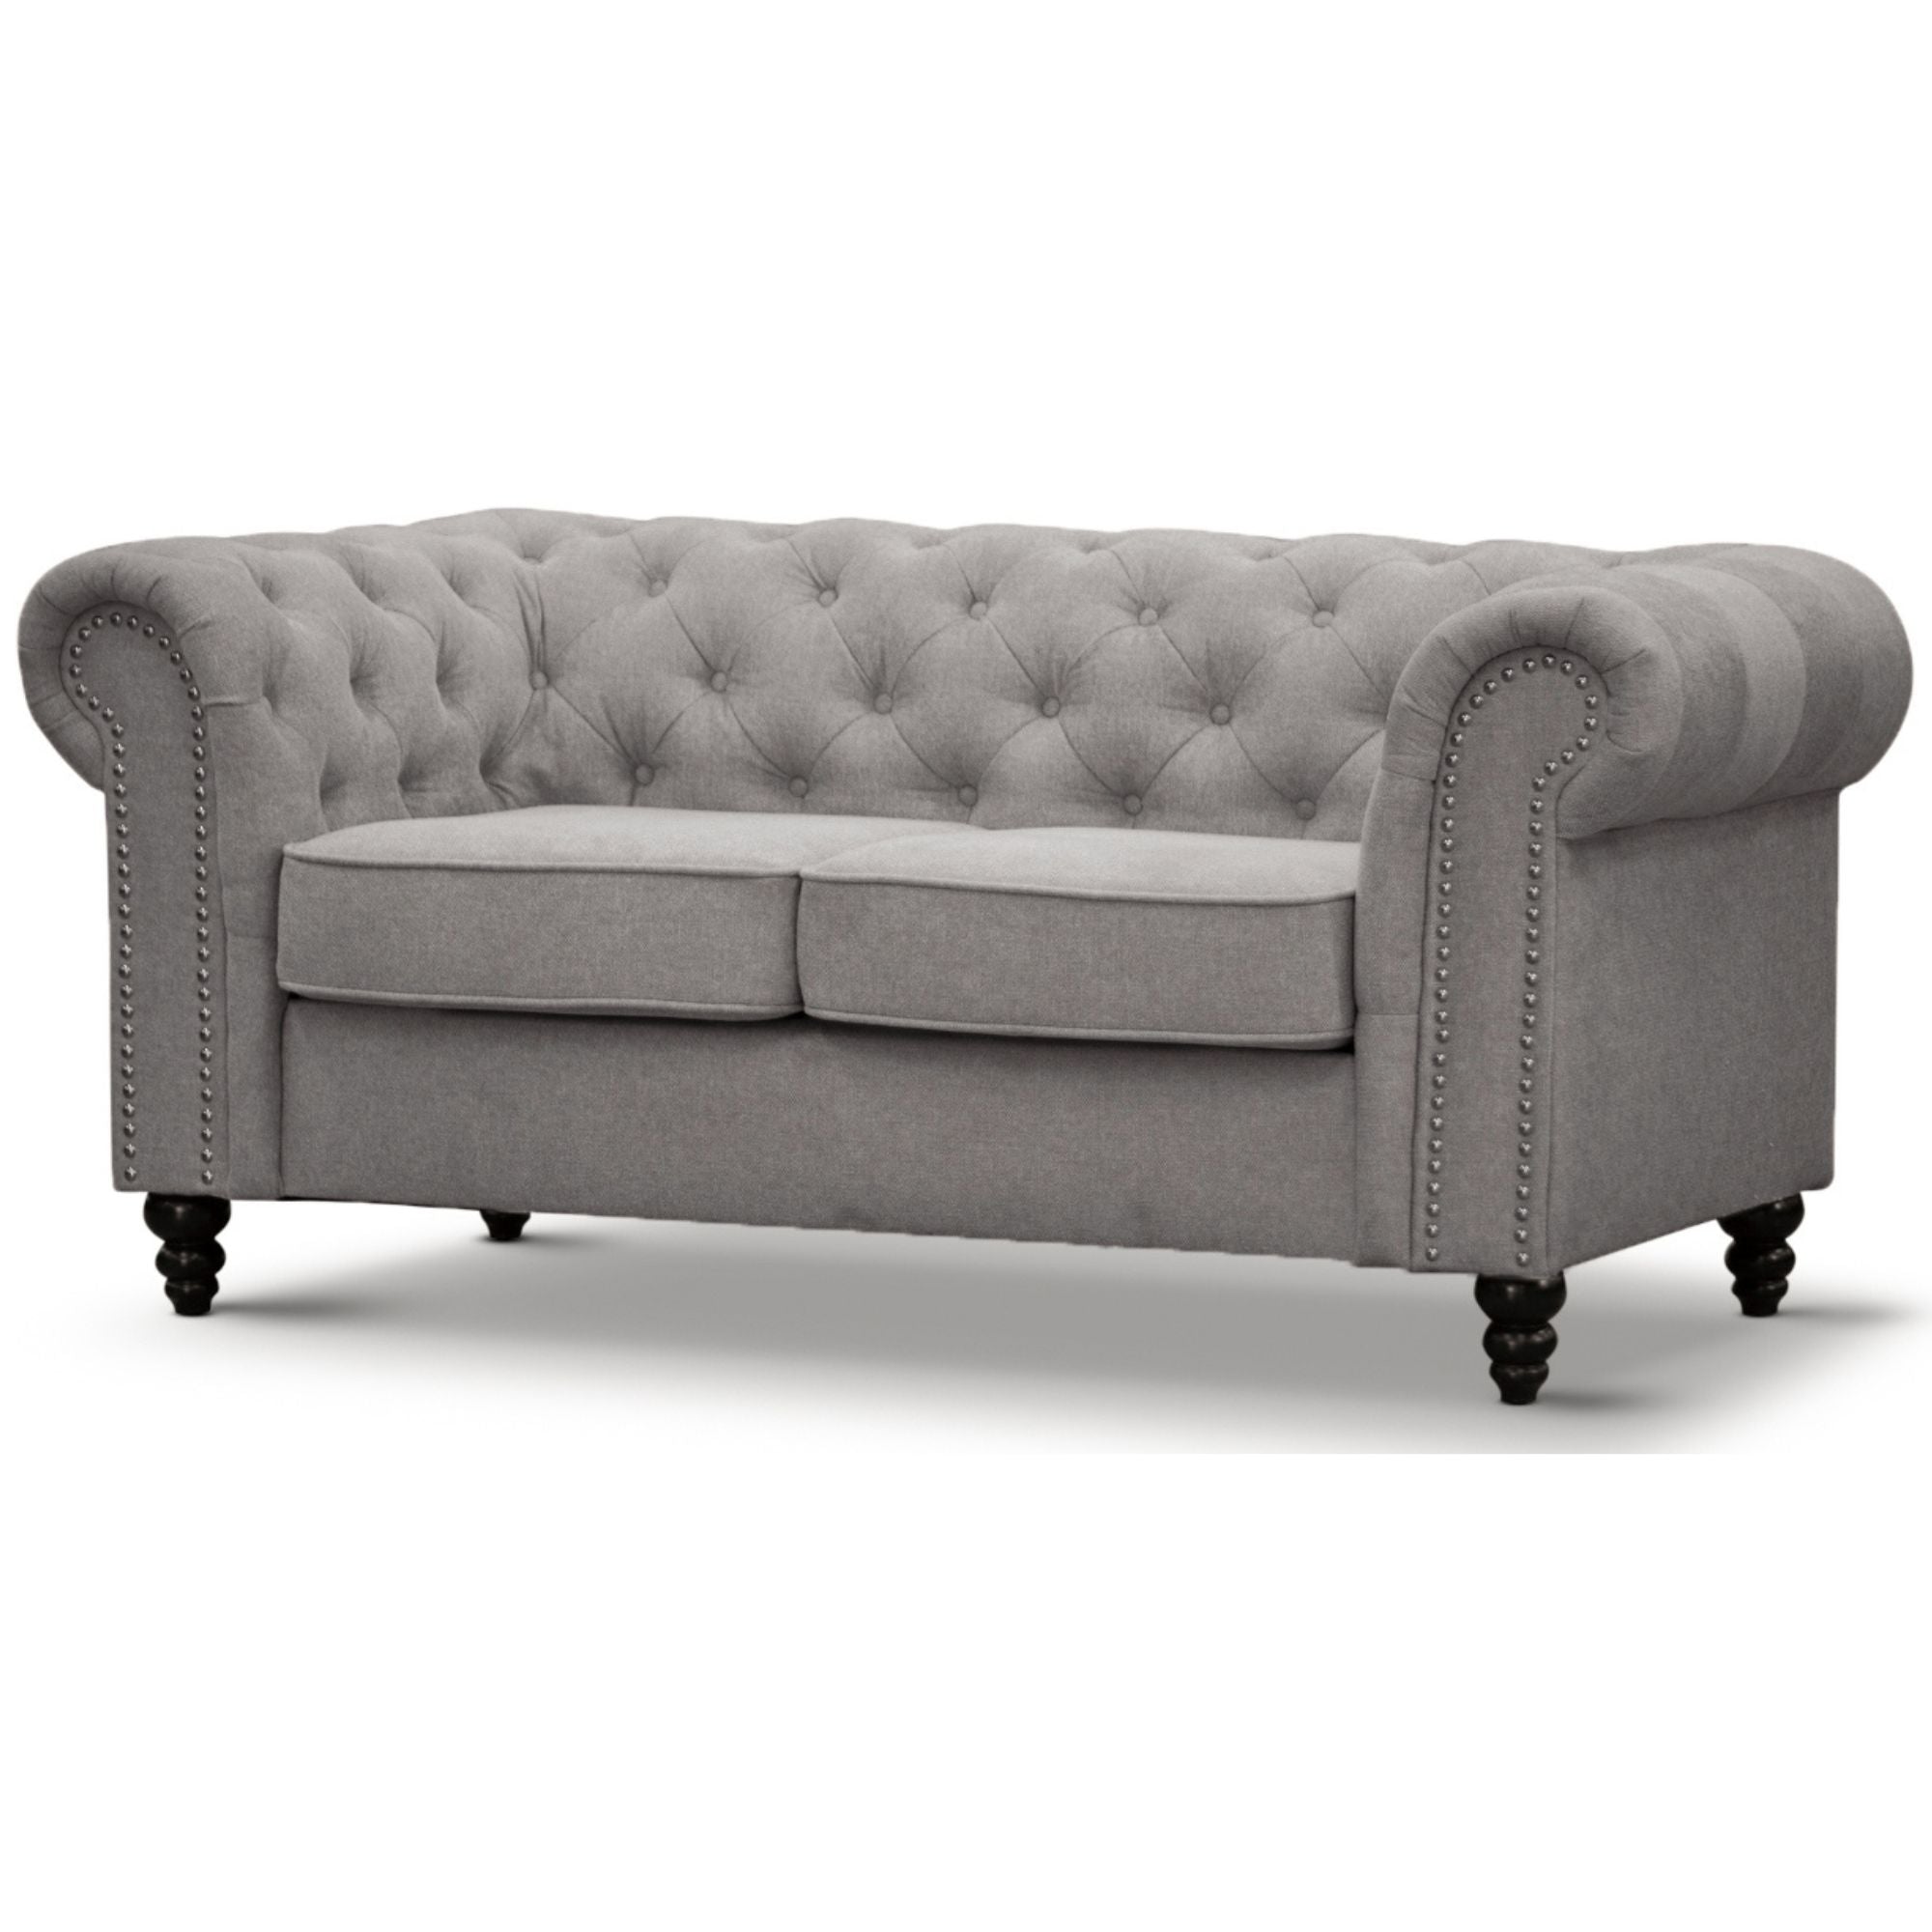 Mellowly 2 Seater Sofa Fabric Uplholstered Chesterfield Lounge Couch - Grey